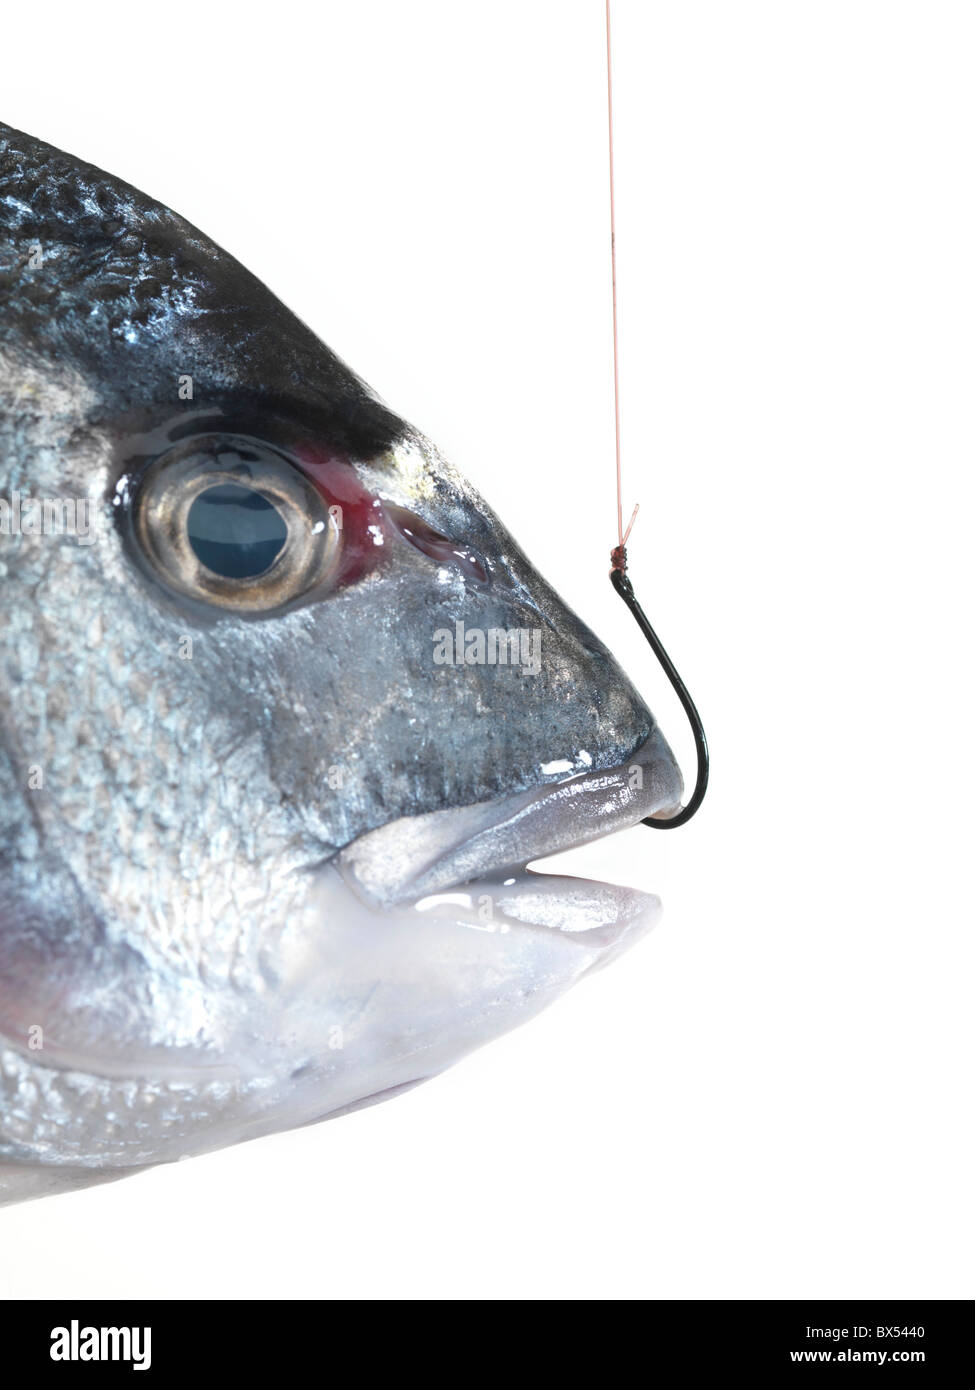 White fish hanging on a fishing line with a hook. Stock Photo by  ©George7423 313360554